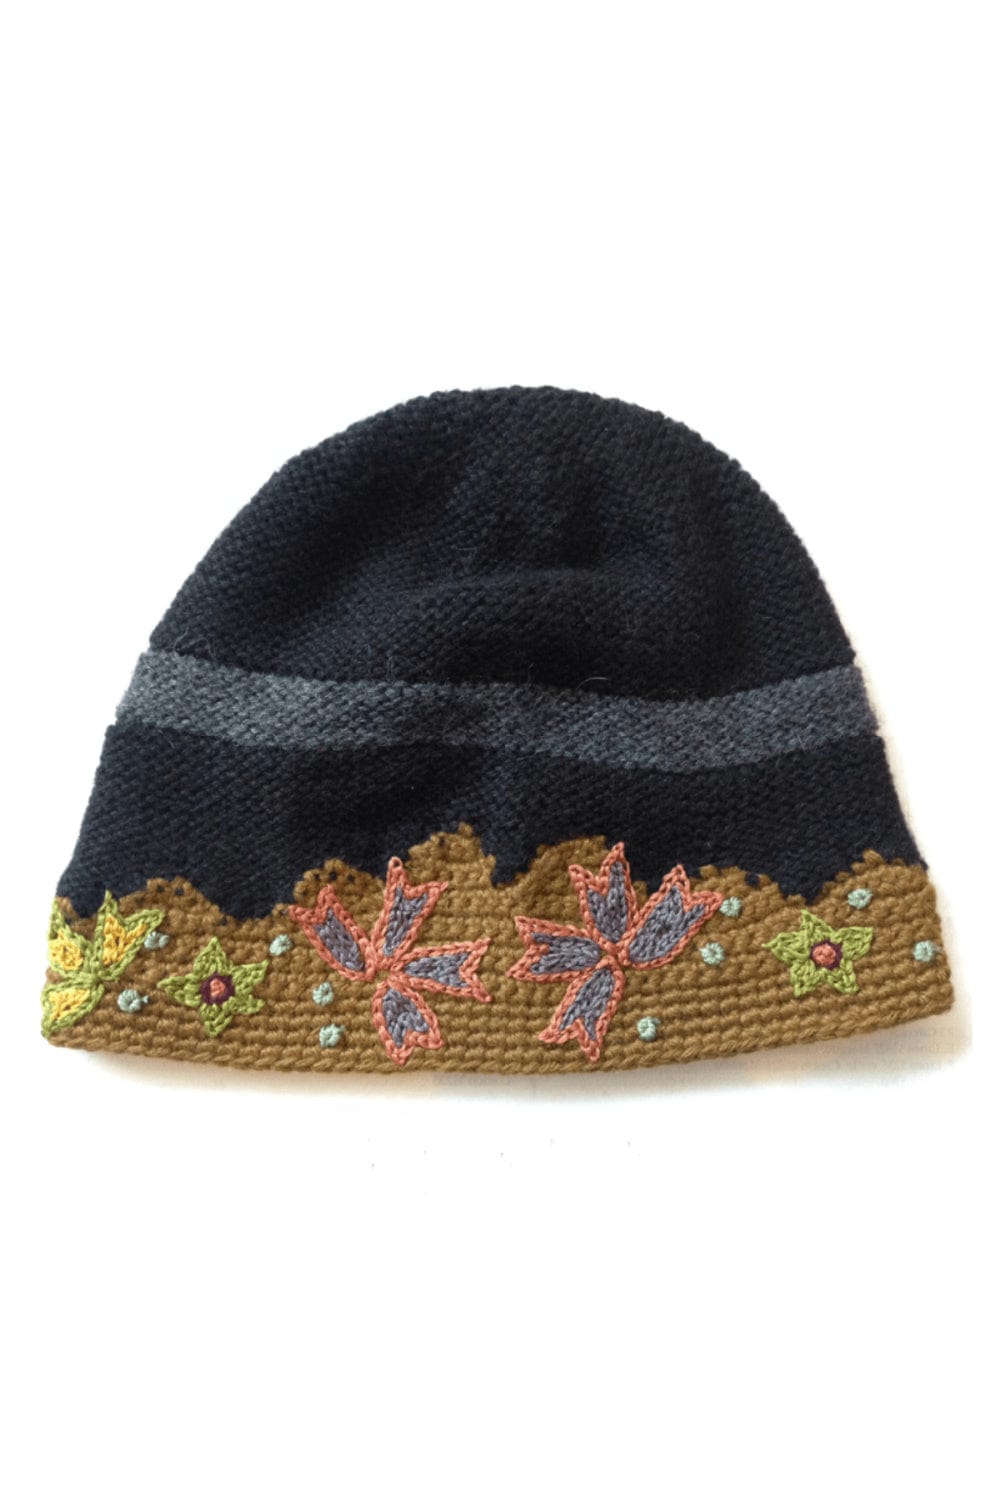 Hand knit alpaca hat black trimmed with mustard knit and embellished with flowers.